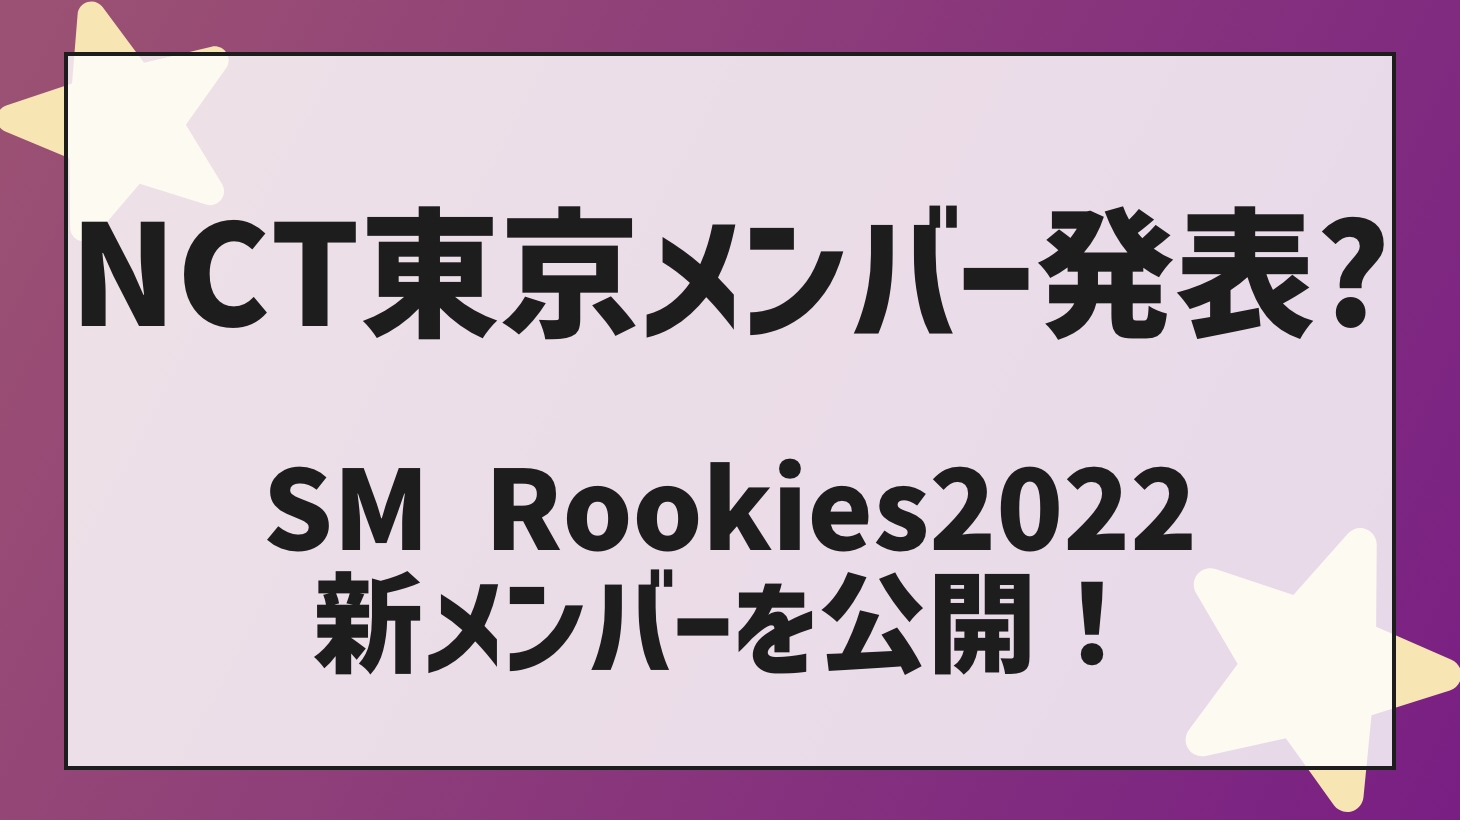 NCT Tokyo member announcement? SMROOKIES 2022 has started!